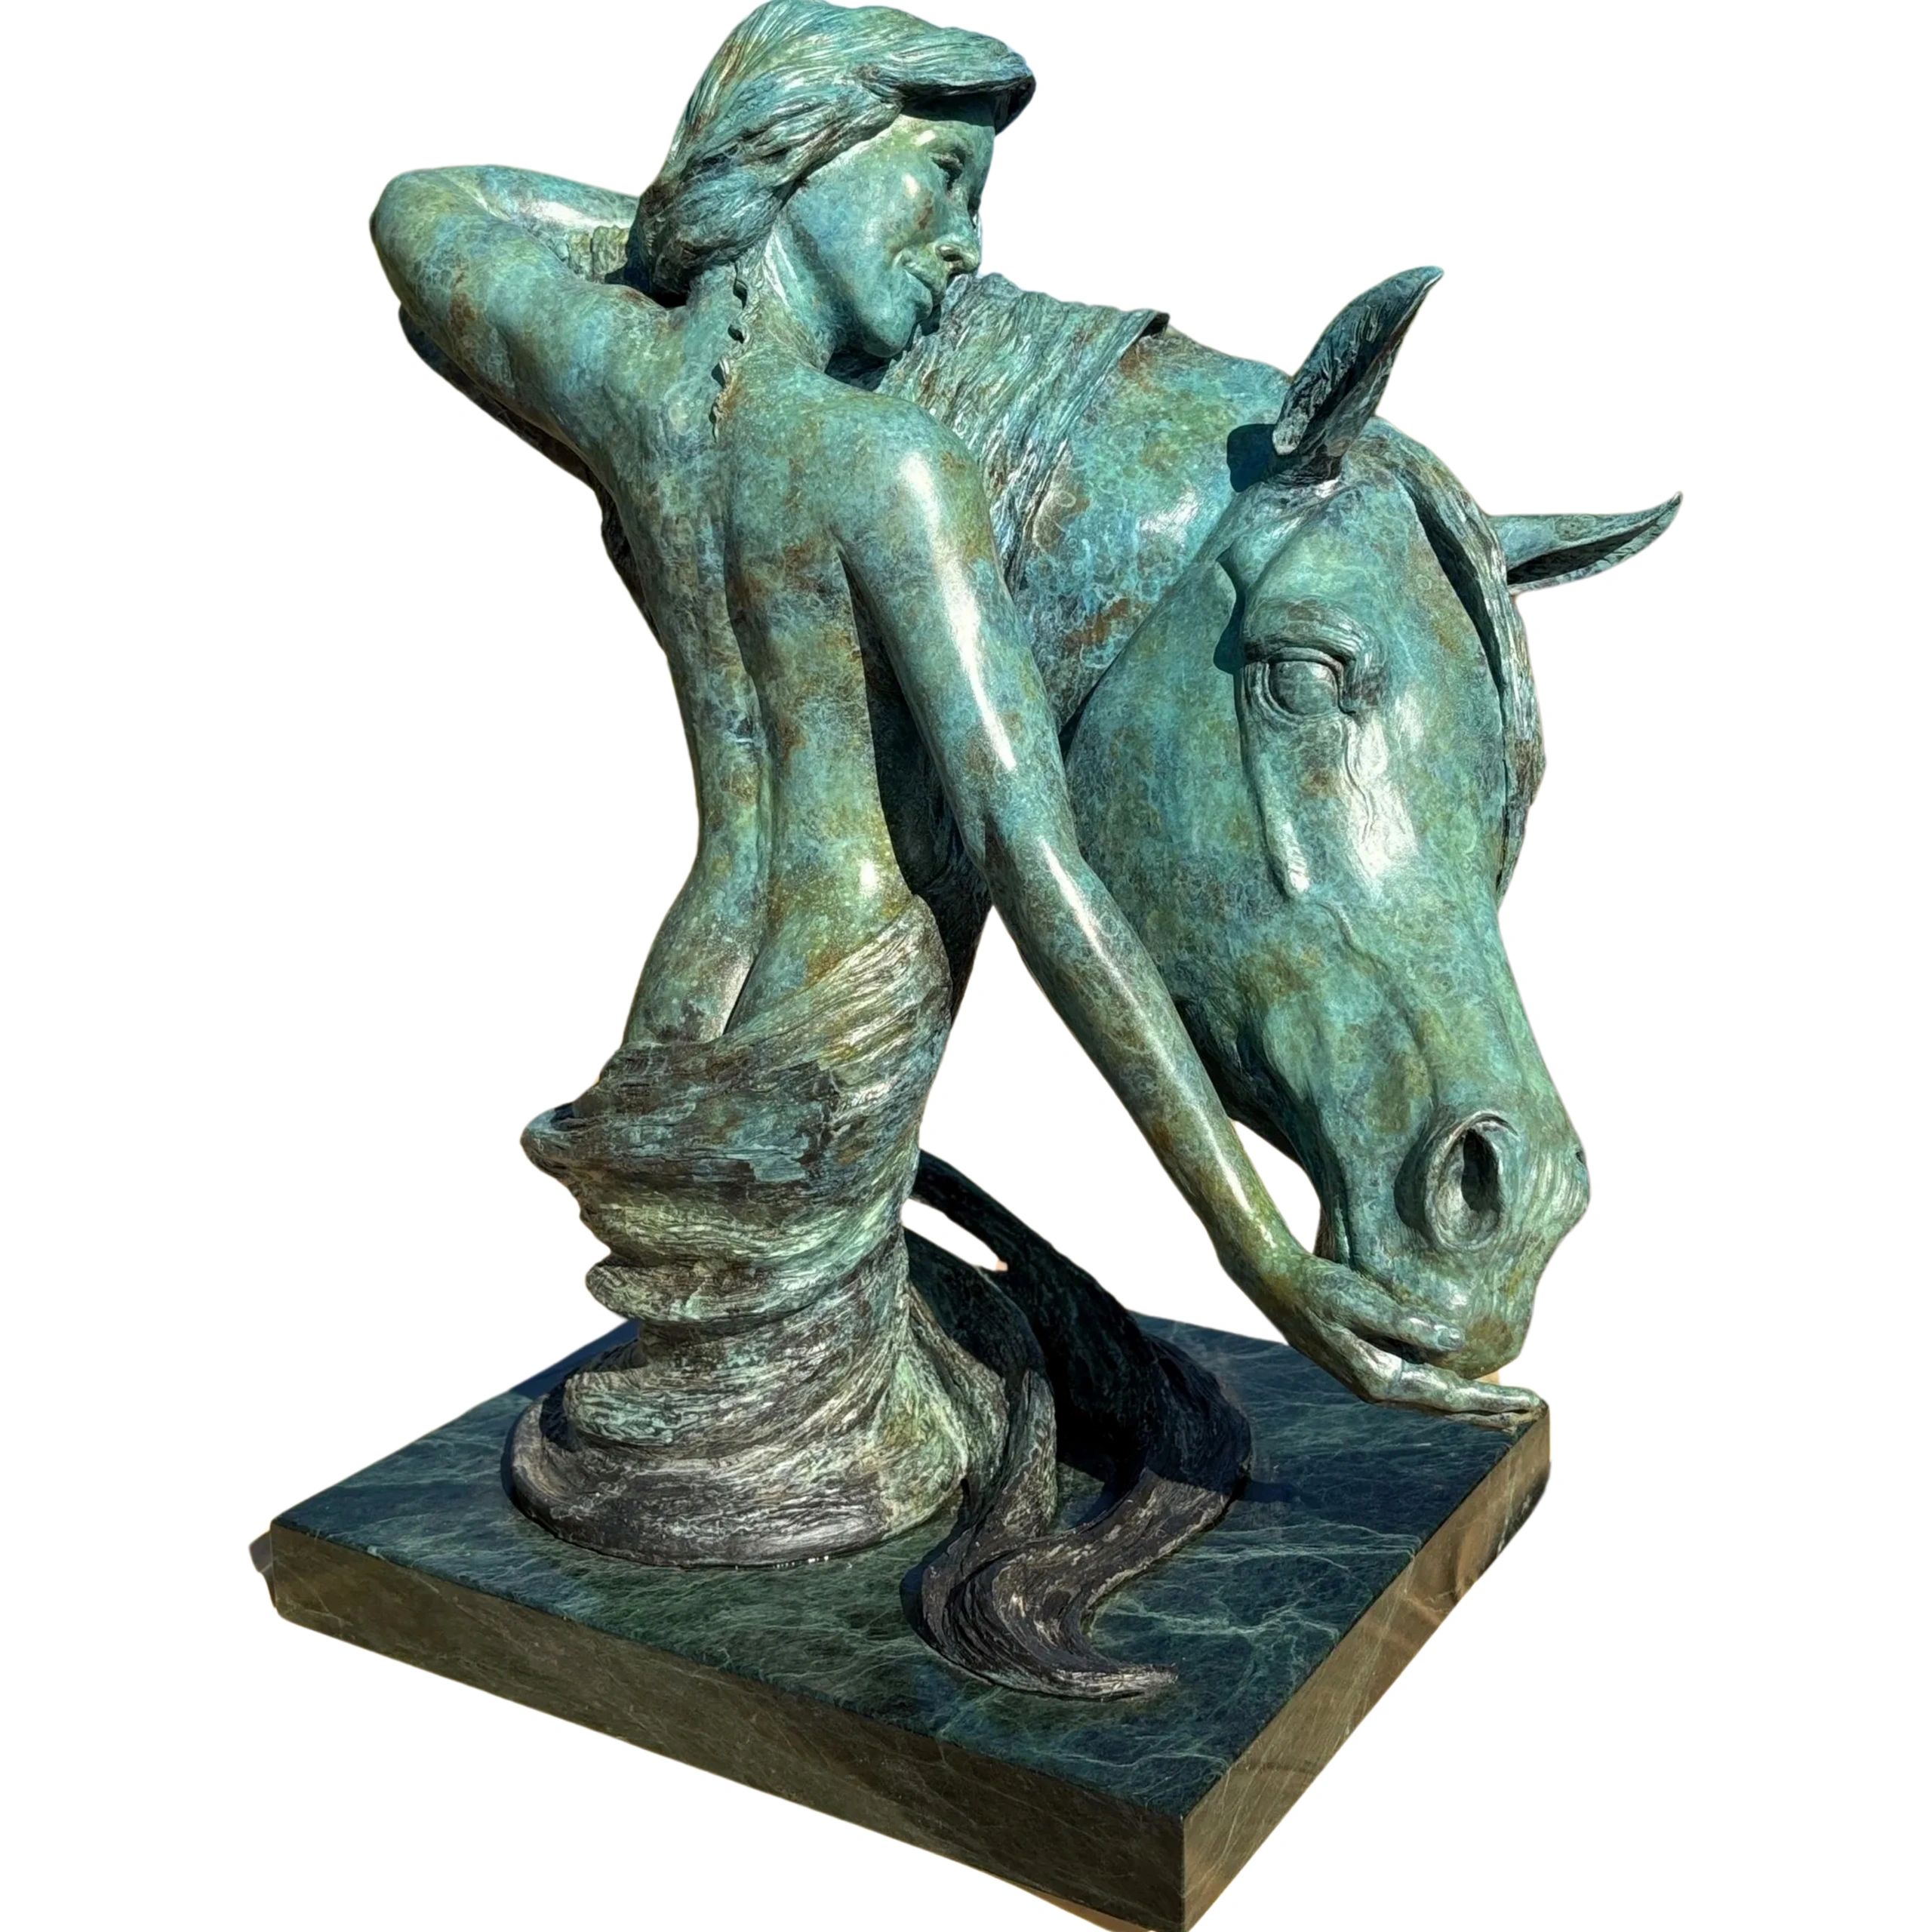 Bronze sculpture of girl and horse. Suitable for either indoors or ourtoor display. 